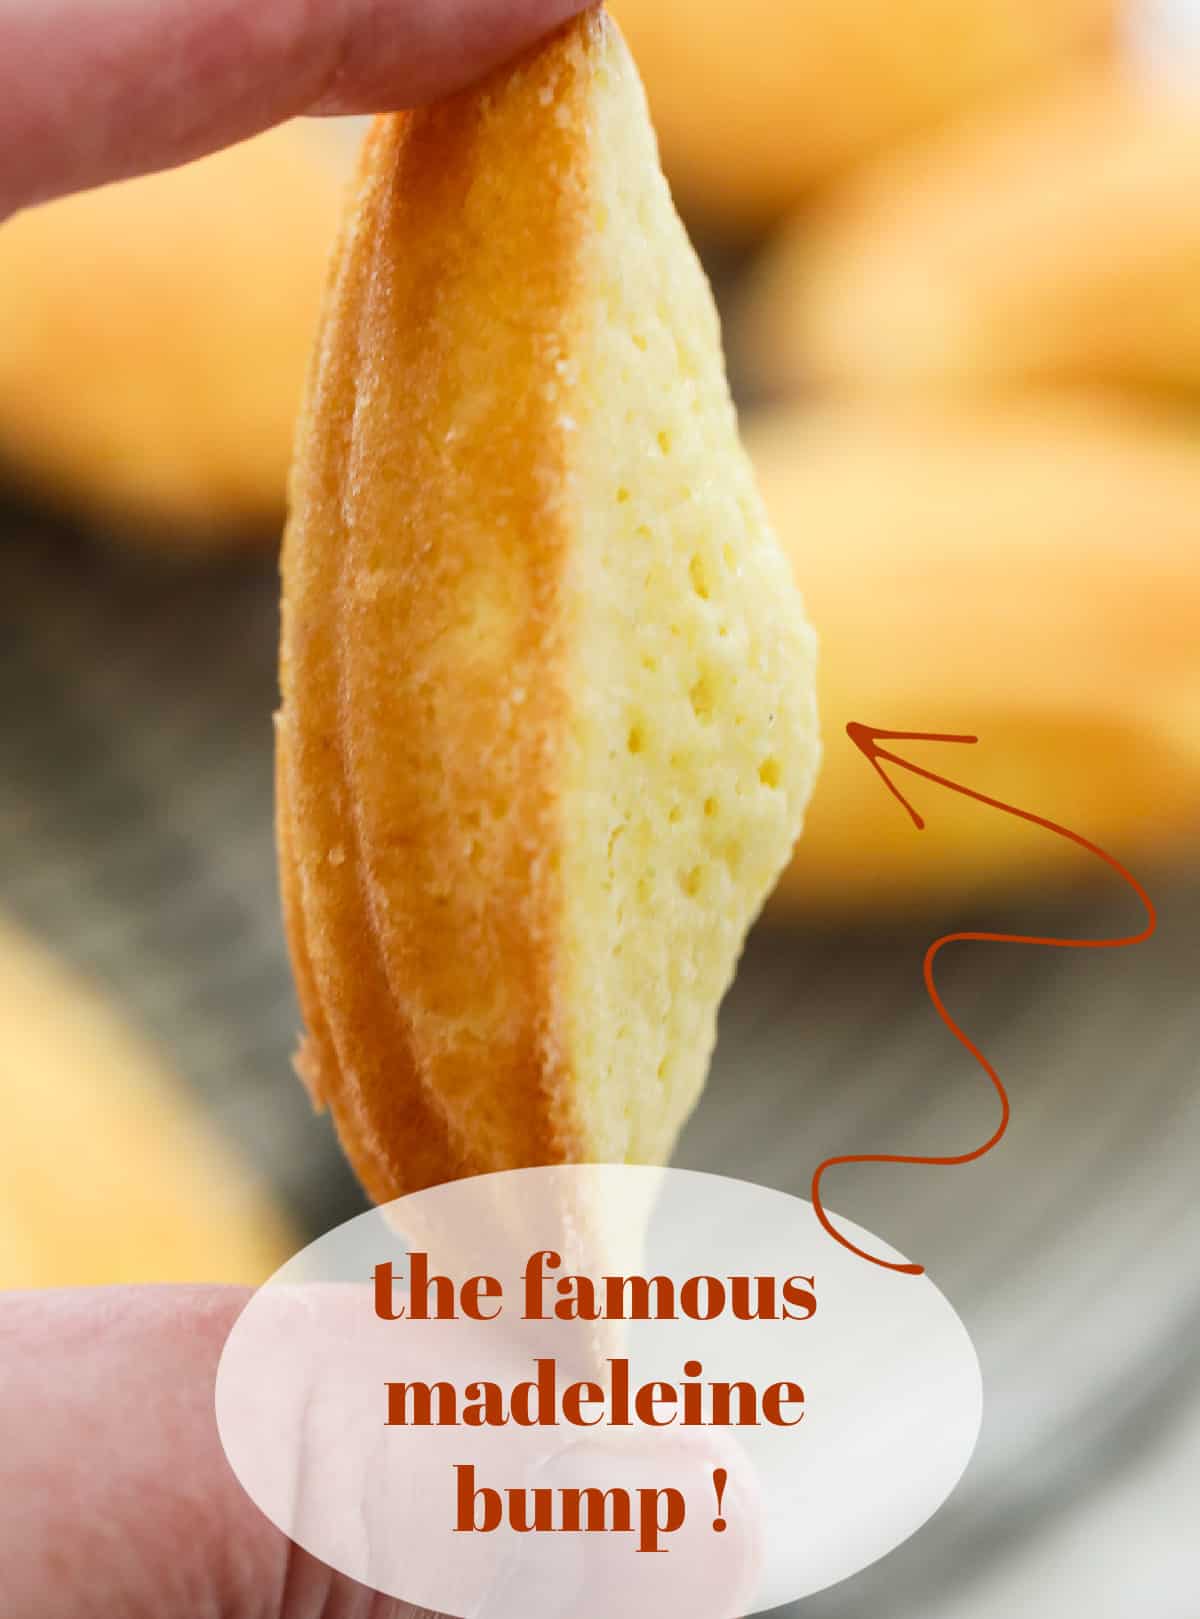 A graphic showing the famous bump on a madeleine.